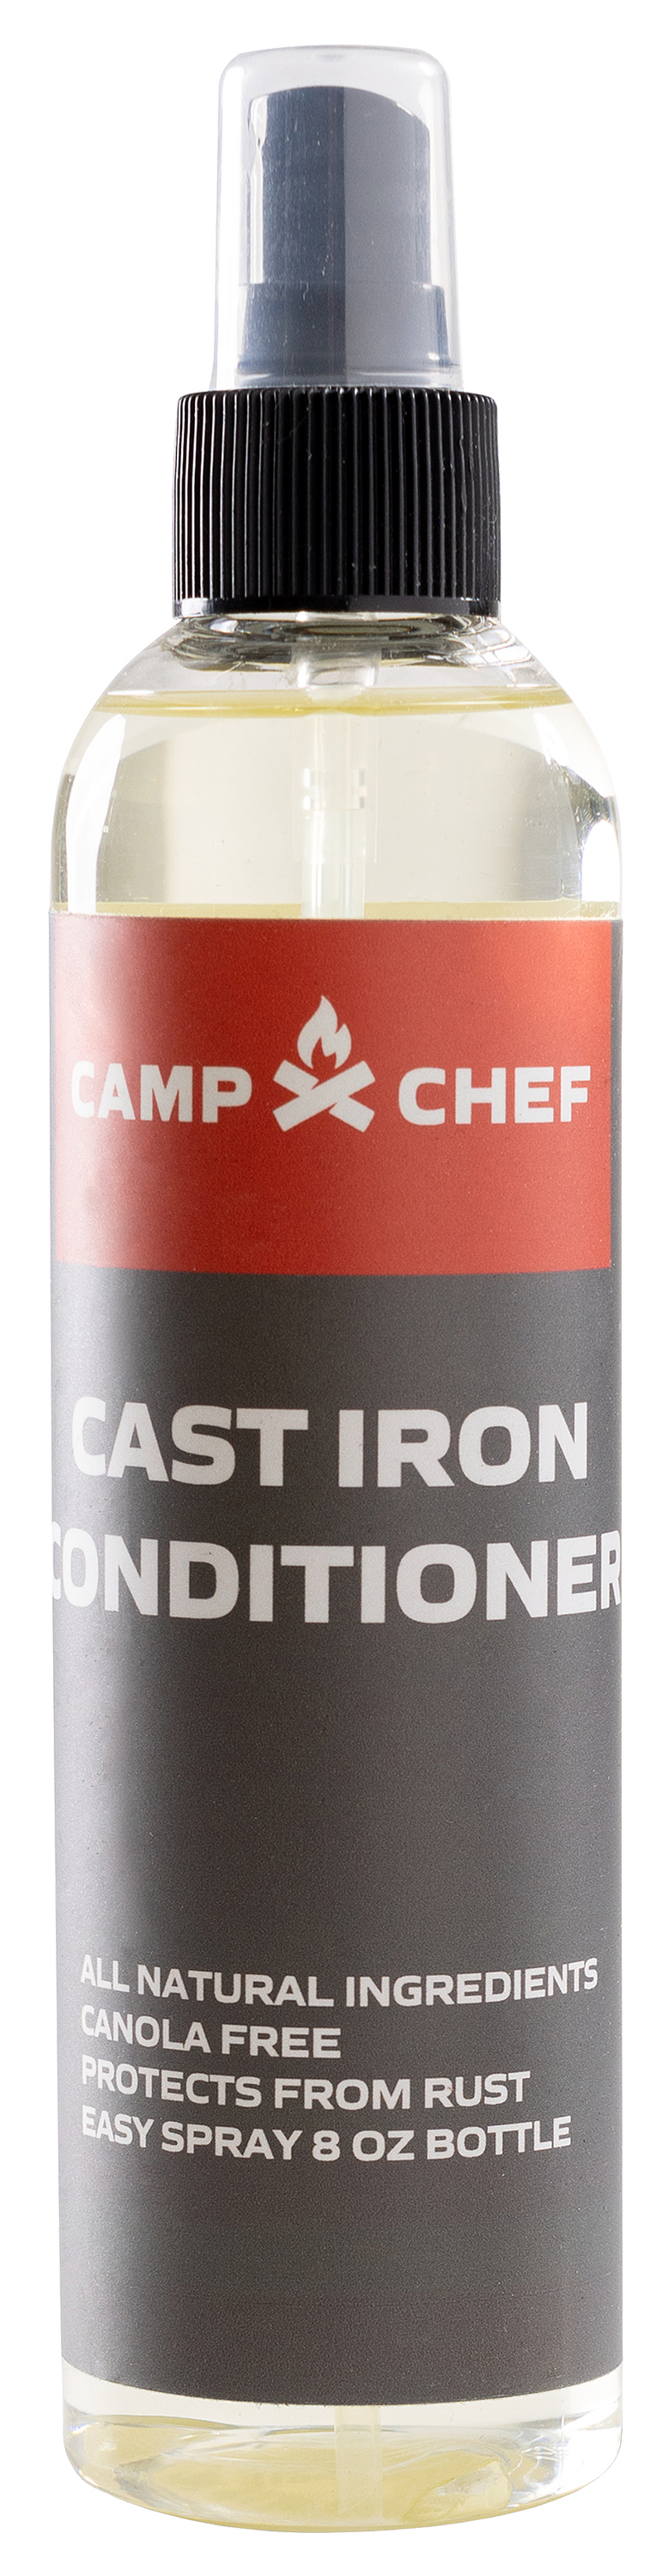 Camp Chef Iron Conditioner Spray, maintenance product for cast iron